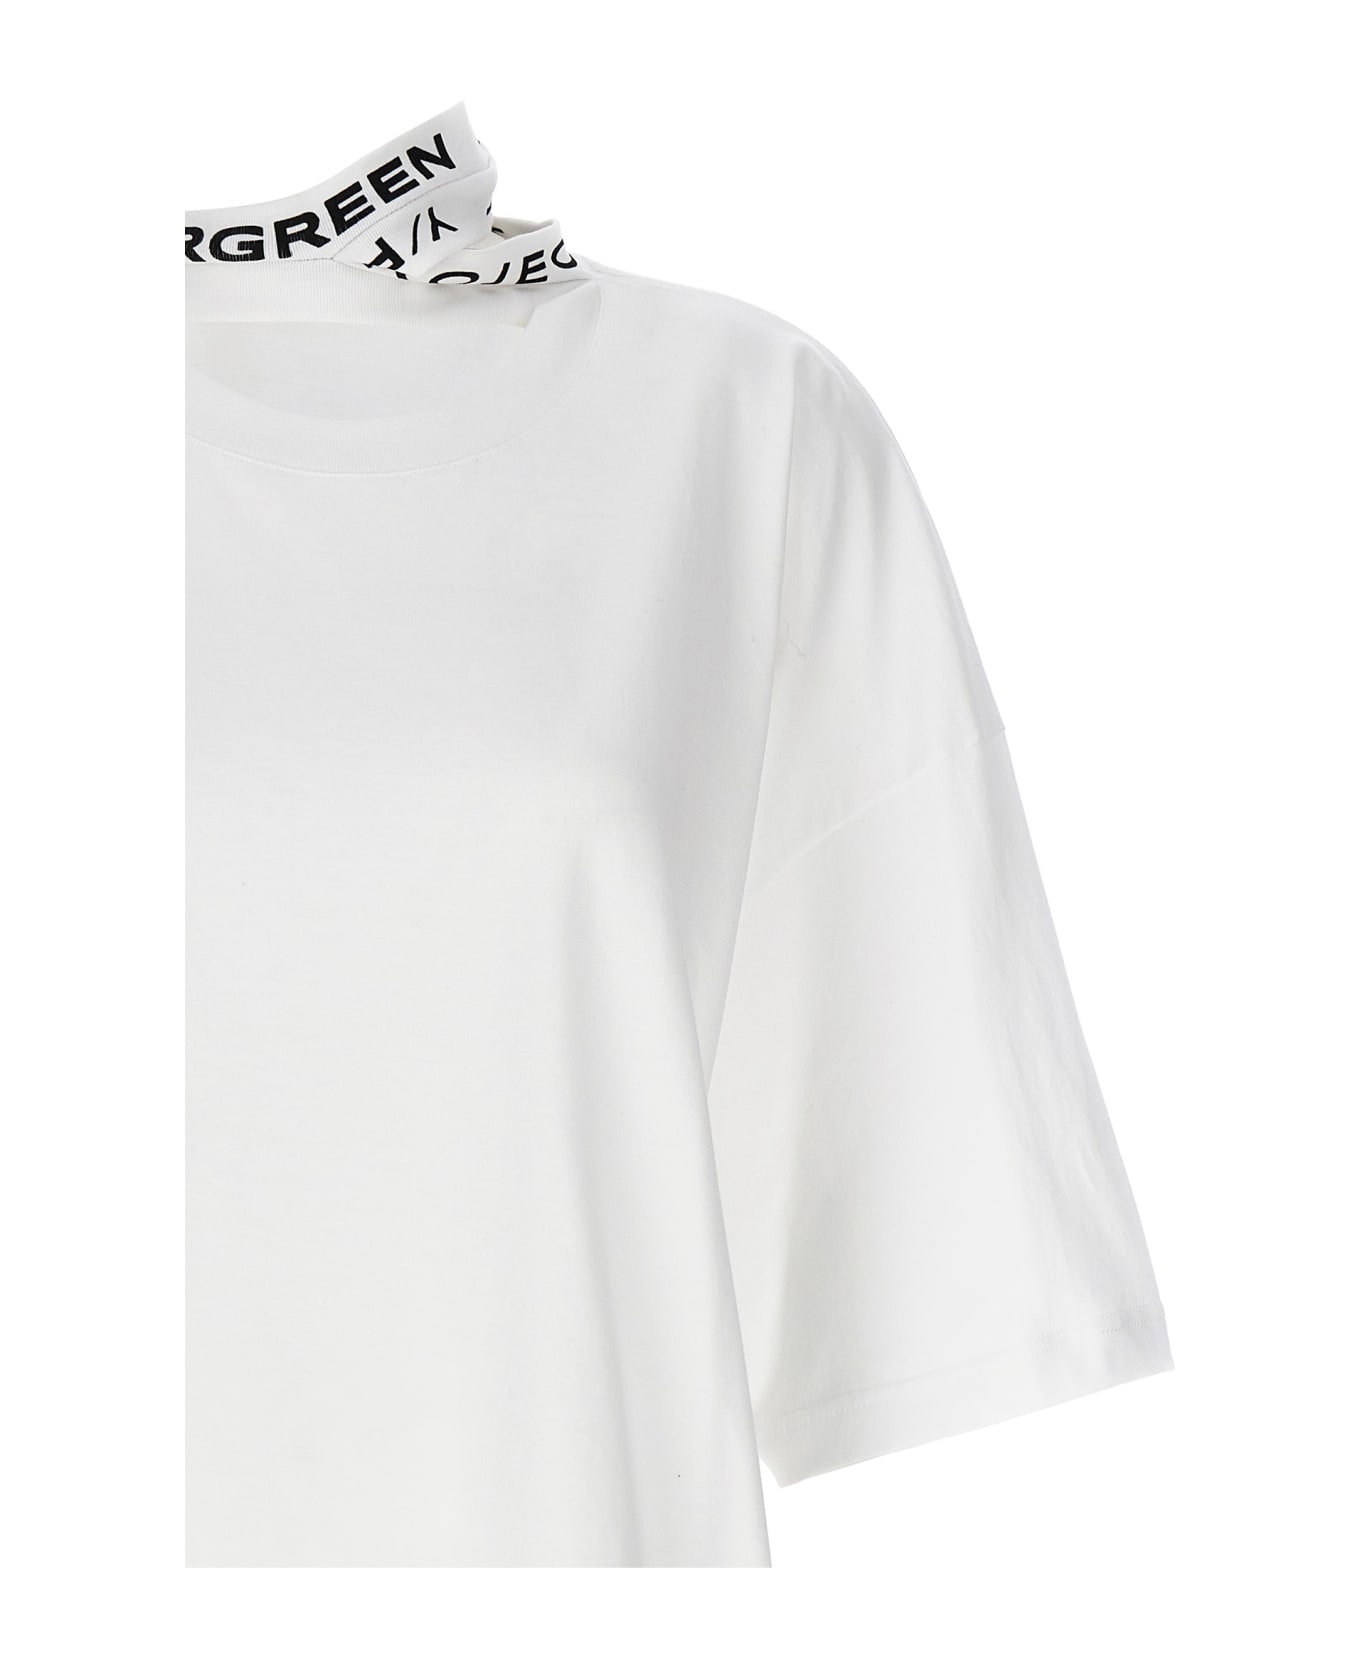 Y/Project 'evergreen' T-shirt - White